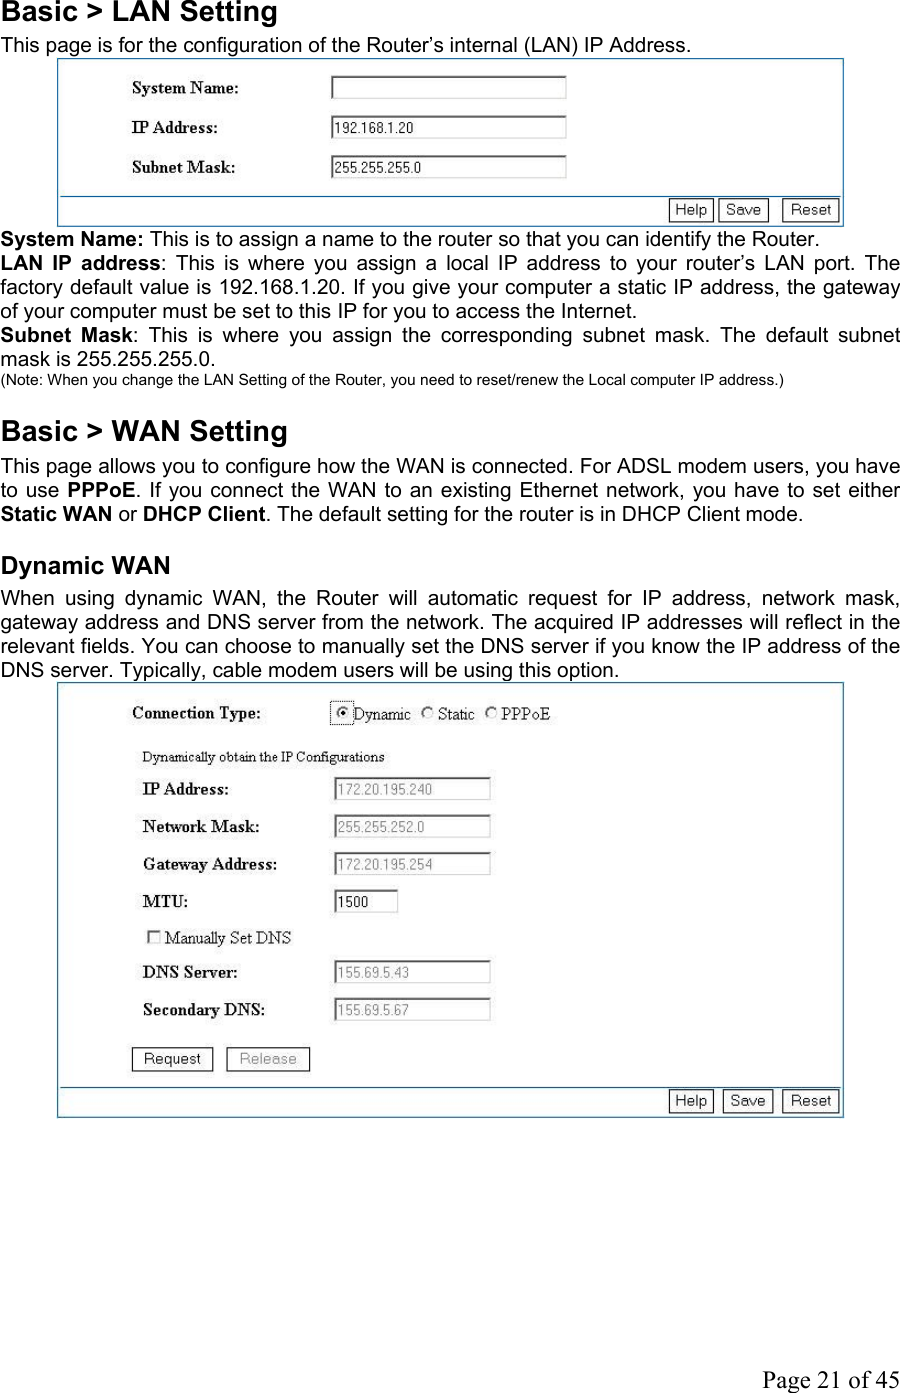 Basic &gt; LAN Setting This page is for the configuration of the Router’s internal (LAN) IP Address.  System Name: This is to assign a name to the router so that you can identify the Router. LAN IP address: This is where you assign a local IP address to your router’s LAN port. The factory default value is 192.168.1.20. If you give your computer a static IP address, the gateway of your computer must be set to this IP for you to access the Internet. Subnet Mask: This is where you assign the corresponding subnet mask. The default subnet mask is 255.255.255.0. (Note: When you change the LAN Setting of the Router, you need to reset/renew the Local computer IP address.) Basic &gt; WAN Setting This page allows you to configure how the WAN is connected. For ADSL modem users, you have to use PPPoE. If you connect the WAN to an existing Ethernet network, you have to set either Static WAN or DHCP Client. The default setting for the router is in DHCP Client mode. Dynamic WAN When using dynamic WAN, the Router will automatic request for IP address, network mask, gateway address and DNS server from the network. The acquired IP addresses will reflect in the relevant fields. You can choose to manually set the DNS server if you know the IP address of the DNS server. Typically, cable modem users will be using this option.       Page 21 of 45                    